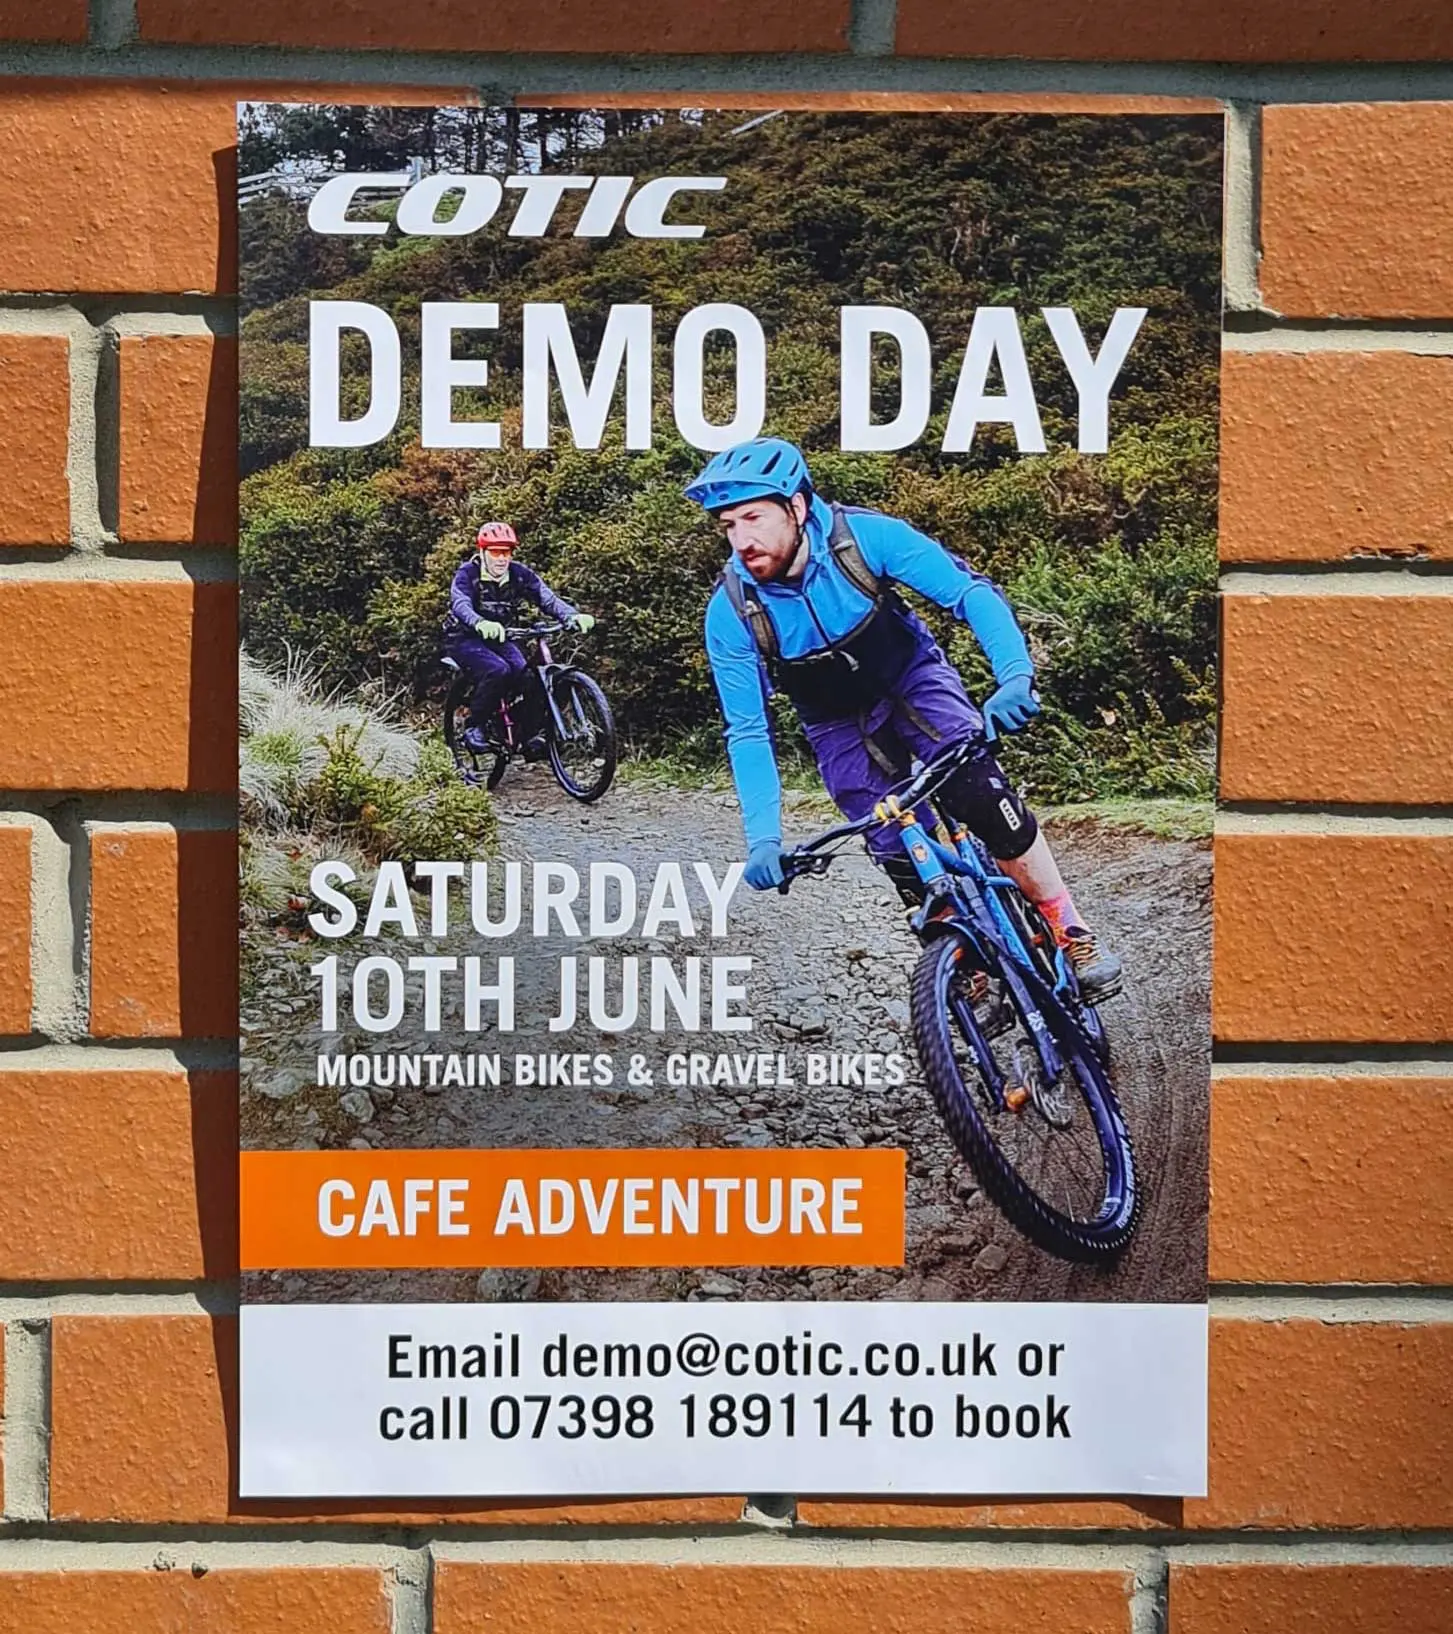 Cotic Demo Day, Saturday 10th June, Mountain Bikes and Gravel Bikes, Cafe Adventure, Hope